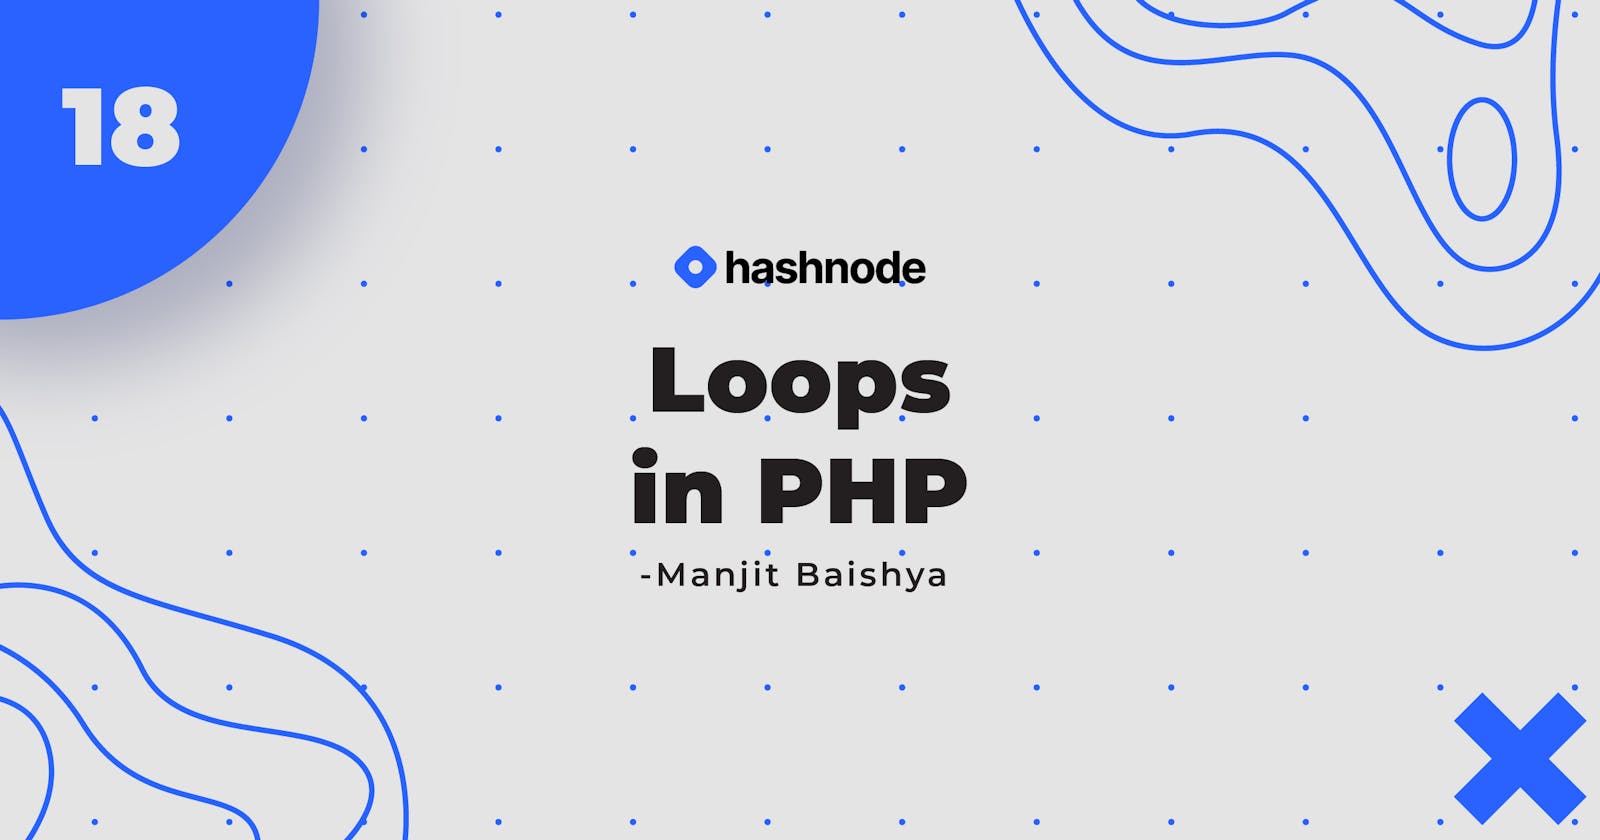 Day 18: Loops in PHP